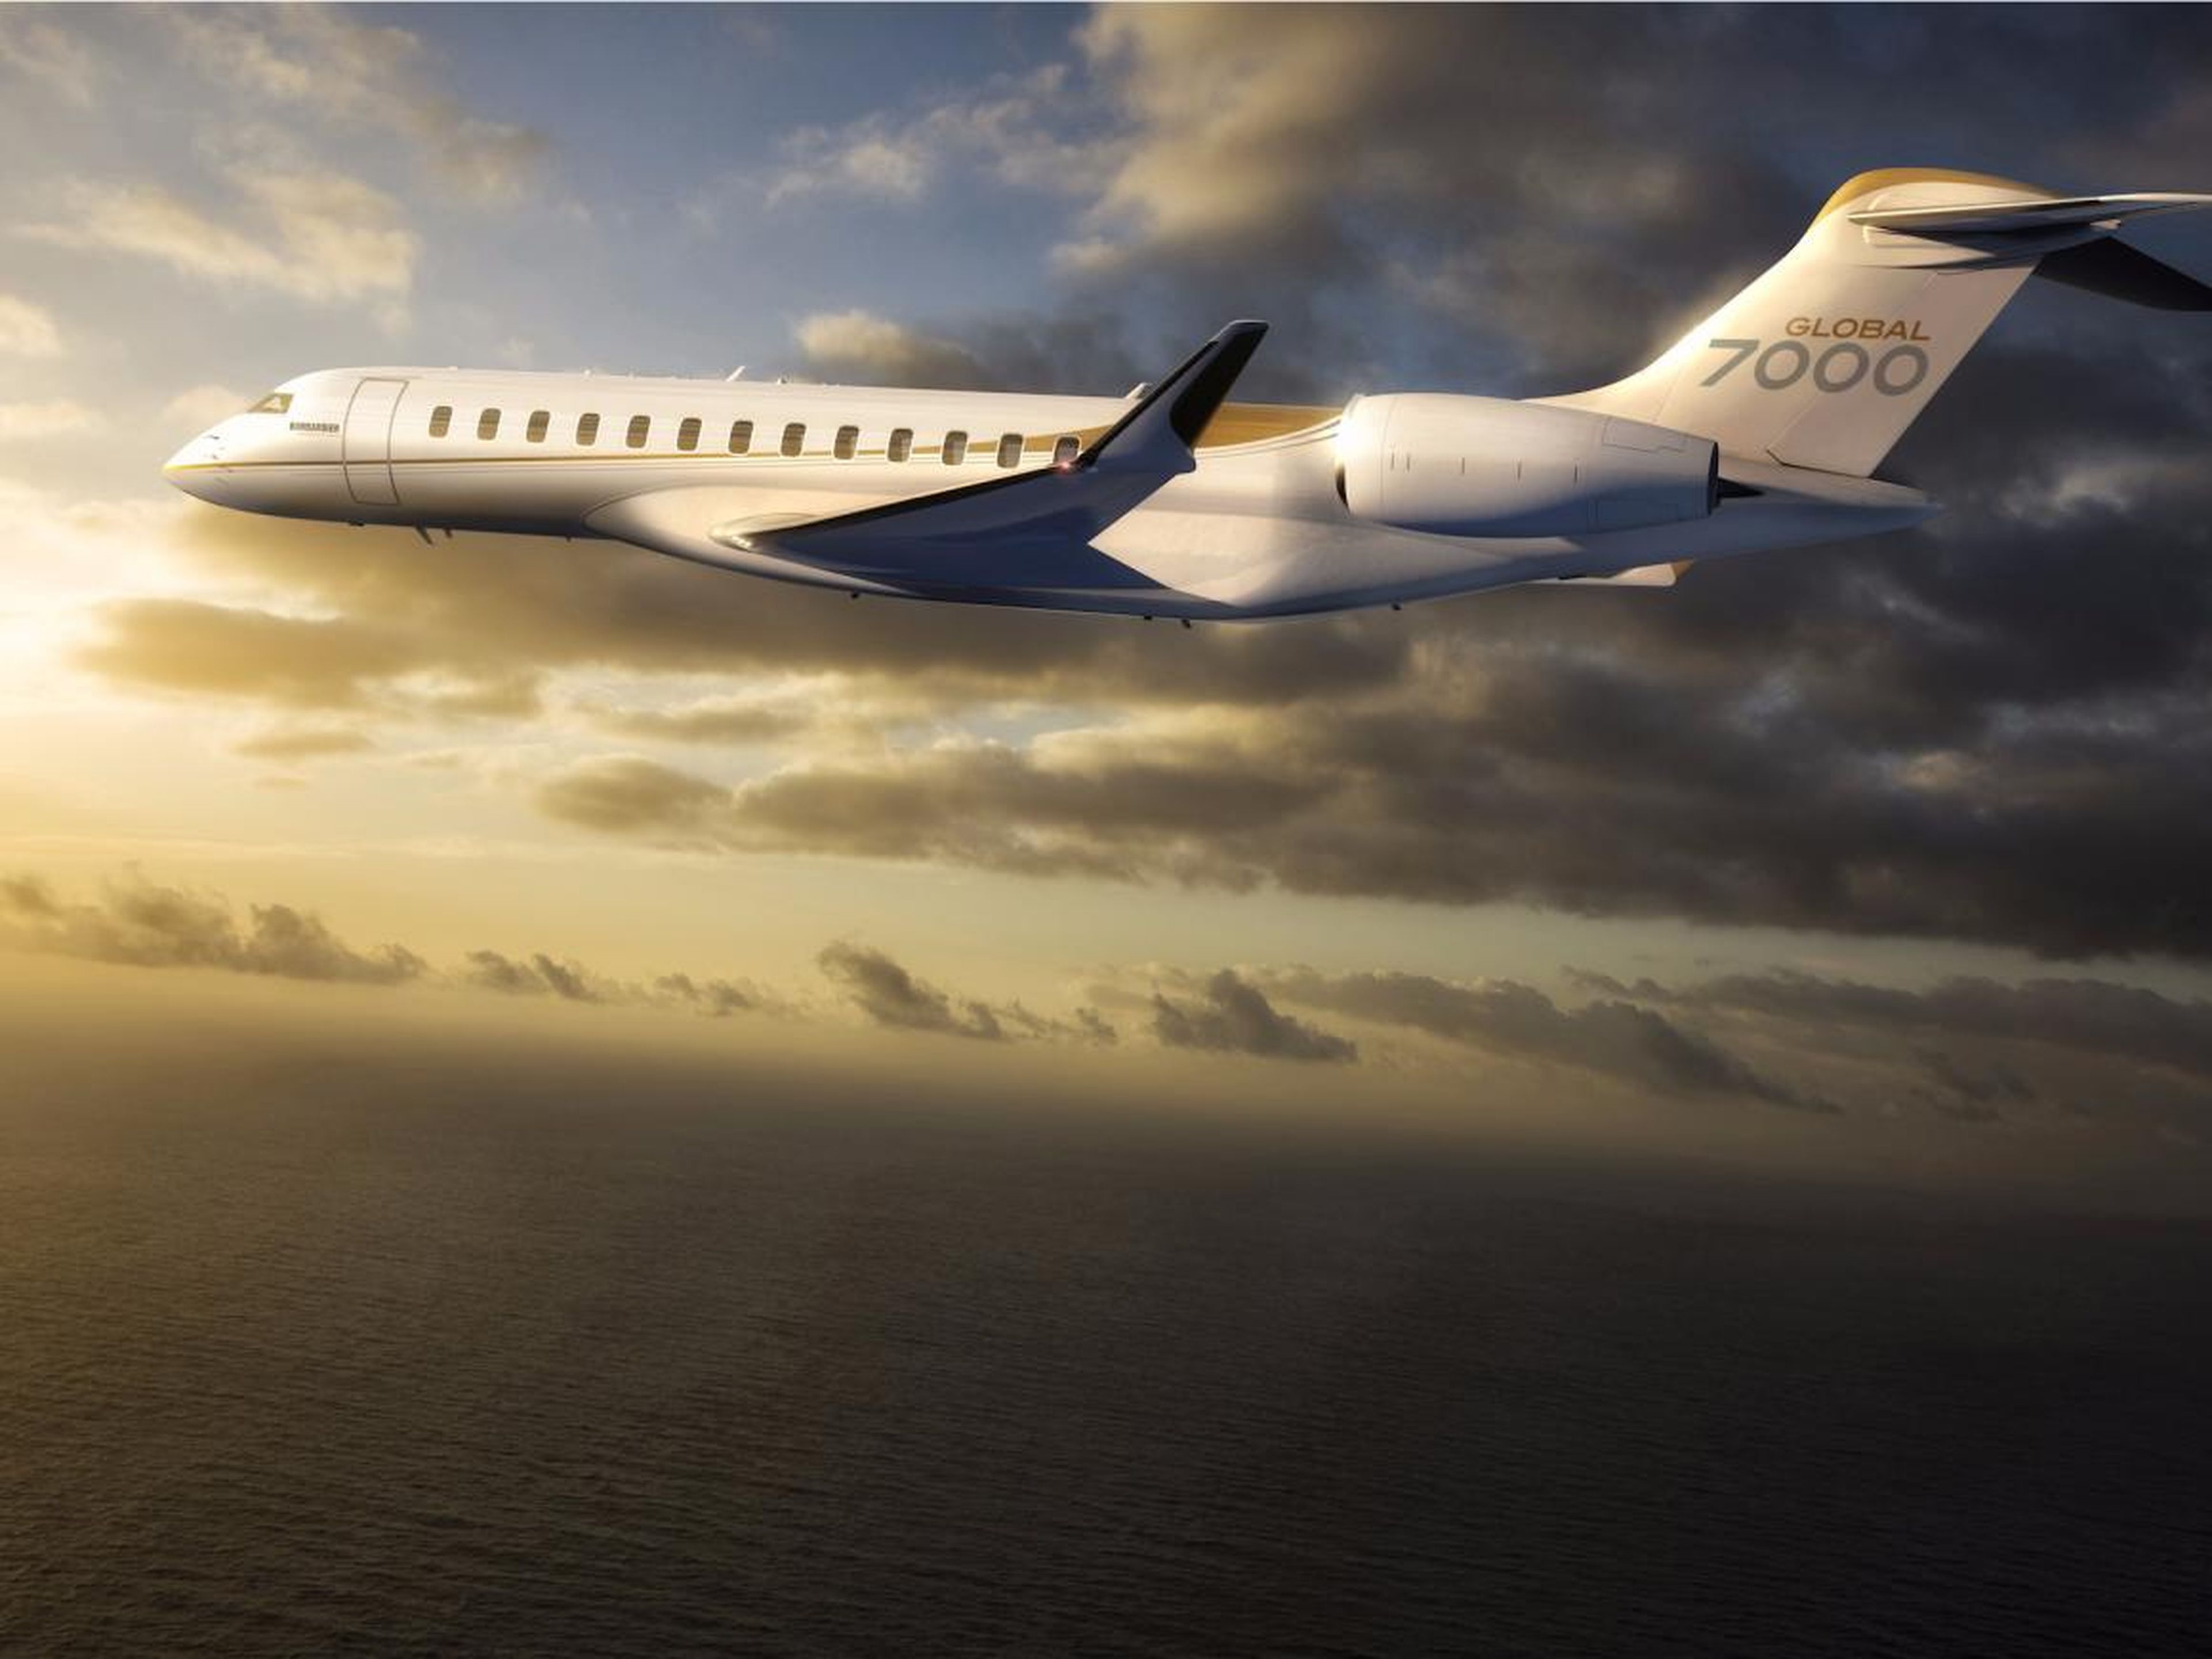 4. Bombardier Global 7000: Like the G650ER, the Global 7000 is designed to be the ultimate long-distance, purpose-built private jet. The $73 million aircraft is set to enter service in the second half of this year.